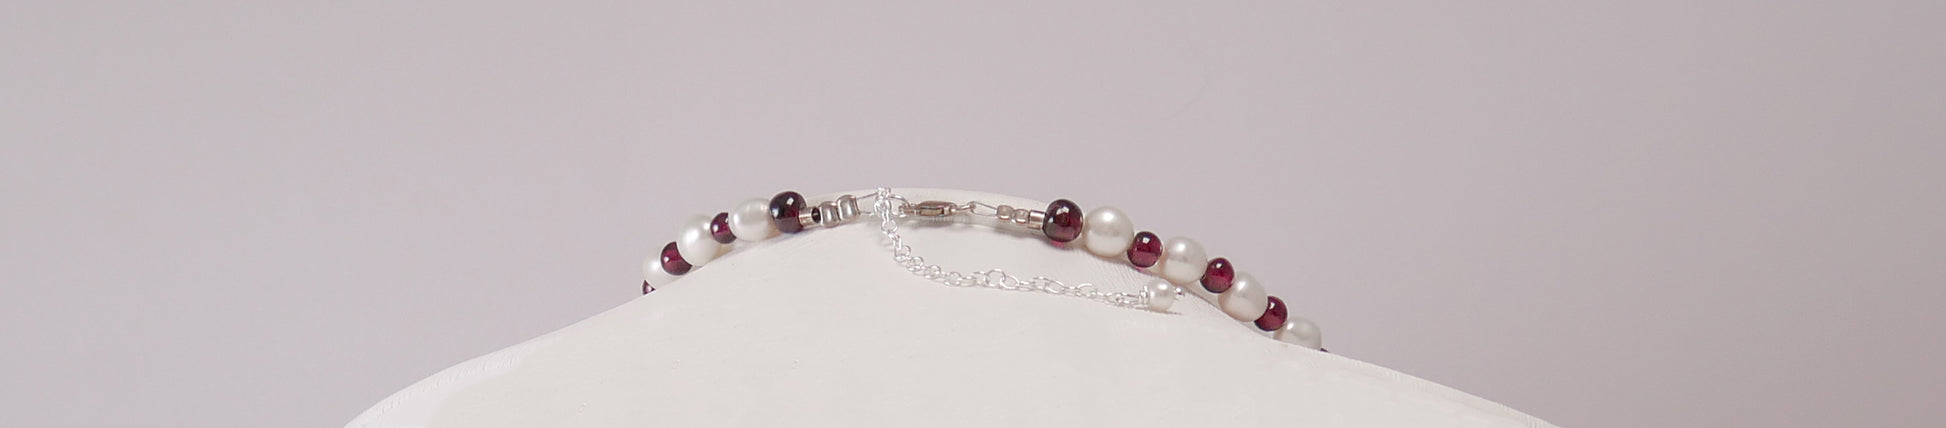 Pearls, Garnets, and Sterling Silver - Katerina Roukouna